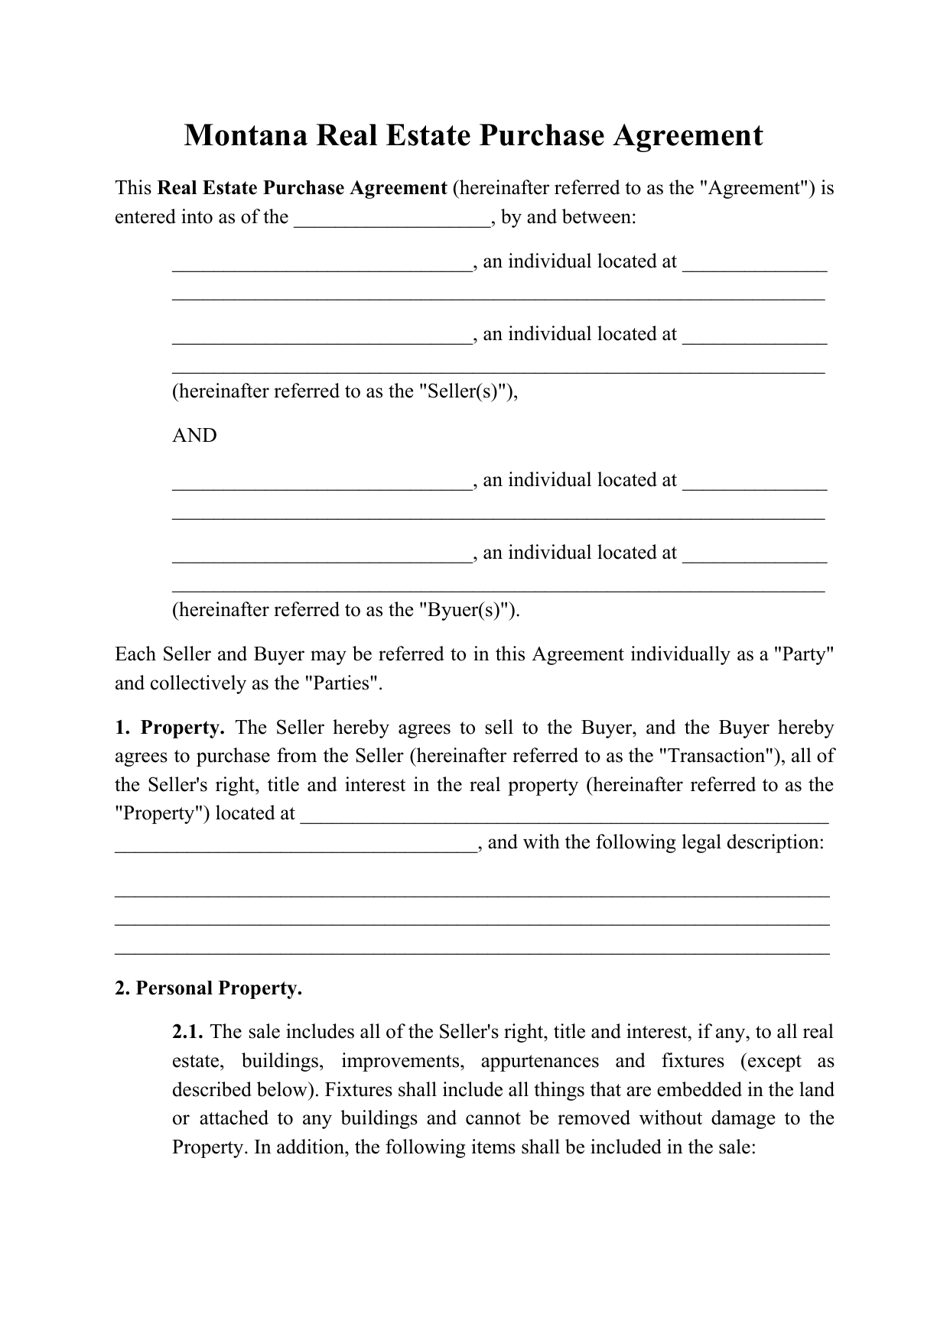 Real Estate Purchase Agreement Template - Montana, Page 1